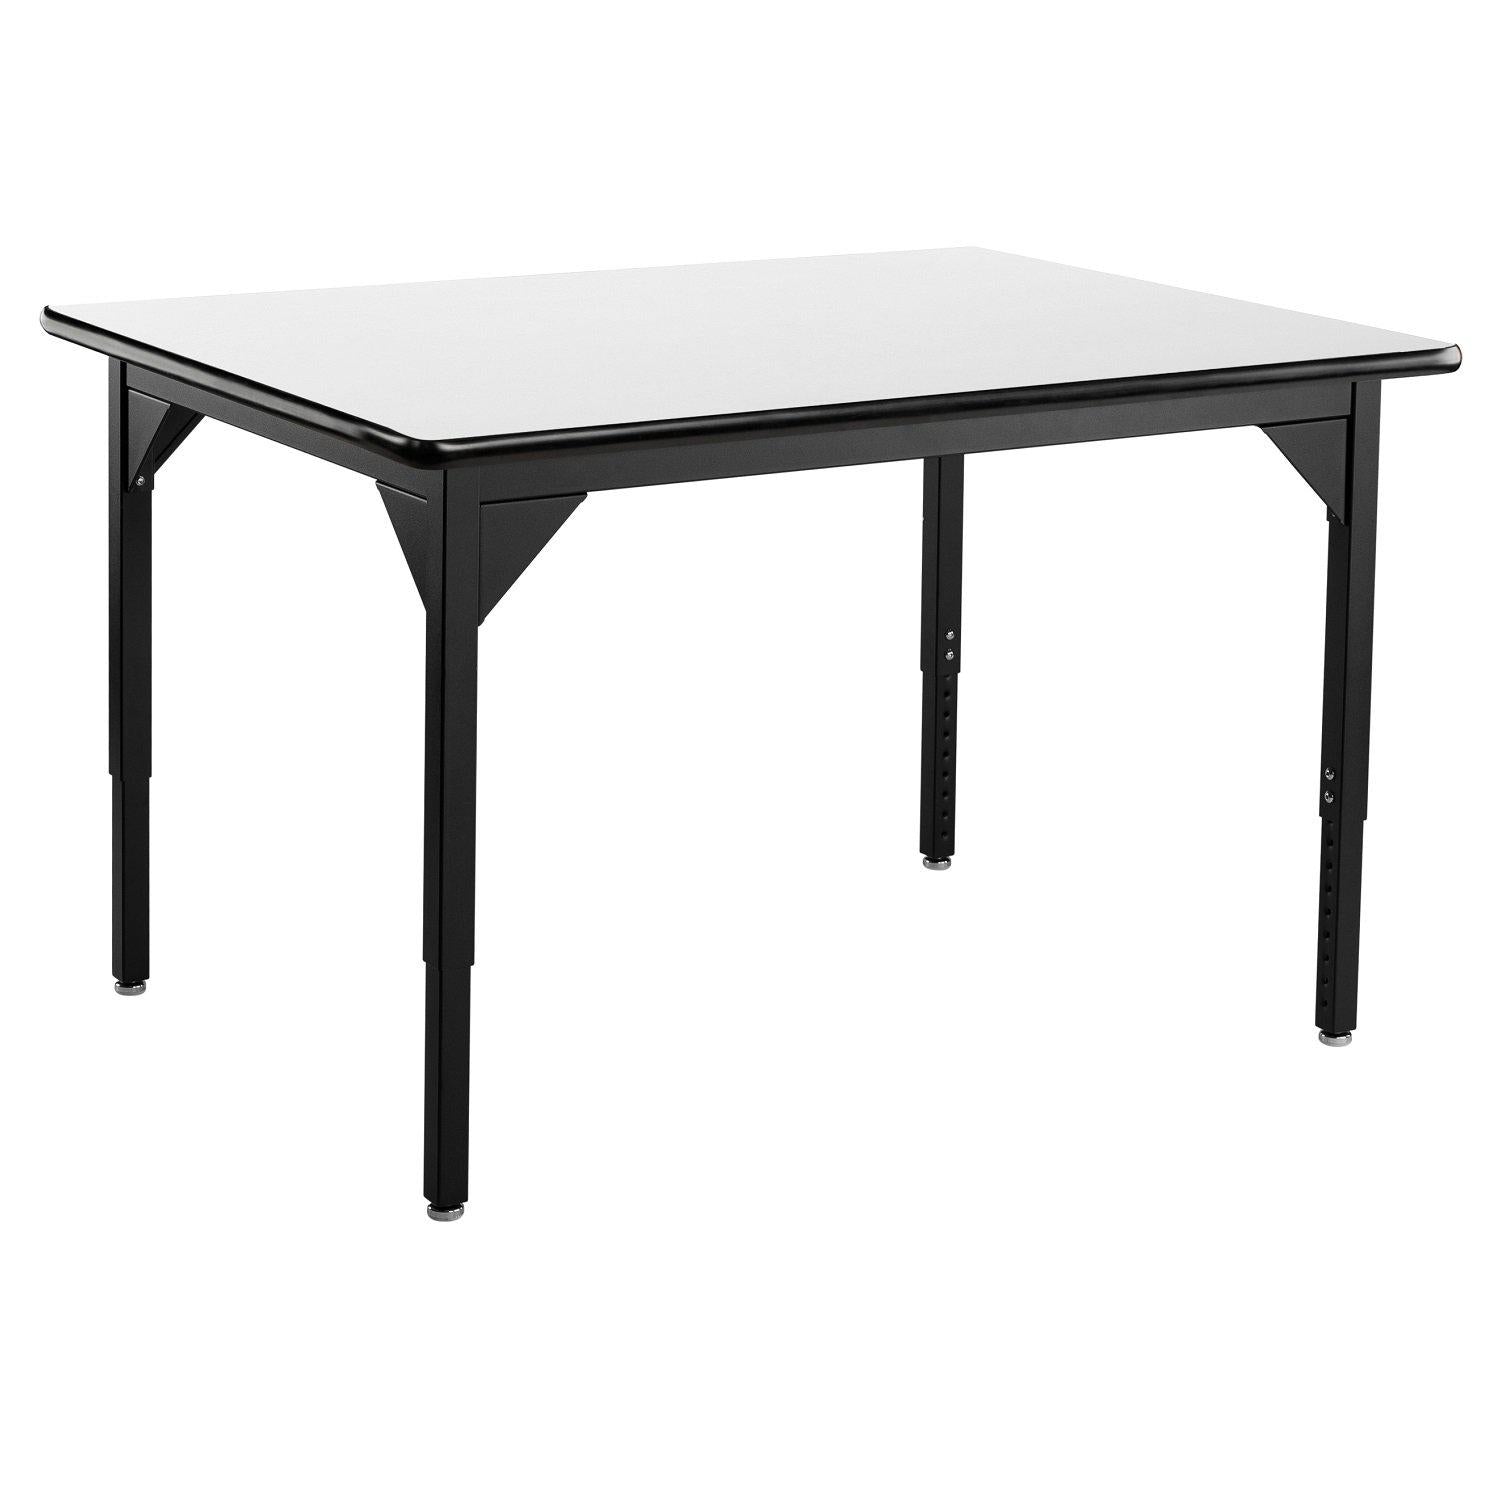 Heavy-Duty Height-Adjustable Utility Table, Black Frame, 36" x 60", Whiteboard High-Pressure Laminate Top